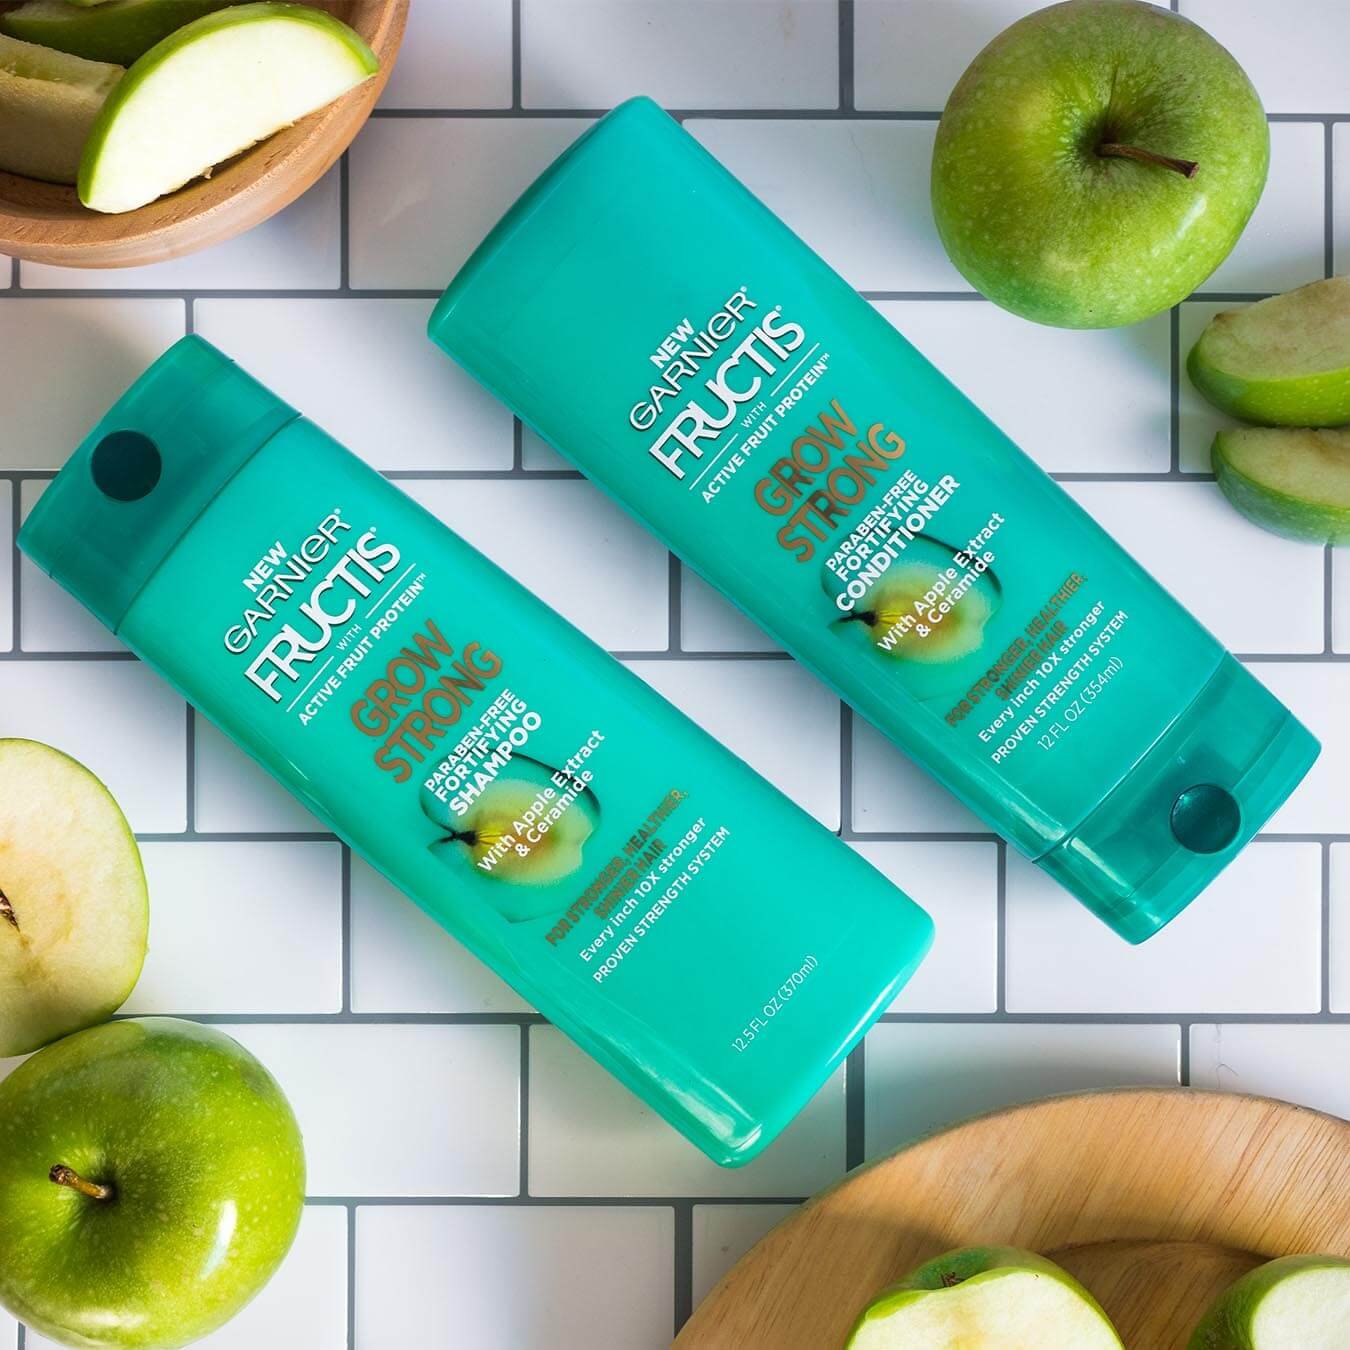 Garnier Fructis Grow Strong Shampoo and Fructis Grow Strong Conditioner on a white tiled background with sliced granny smith apples on wooden plates and in wooden bowls.